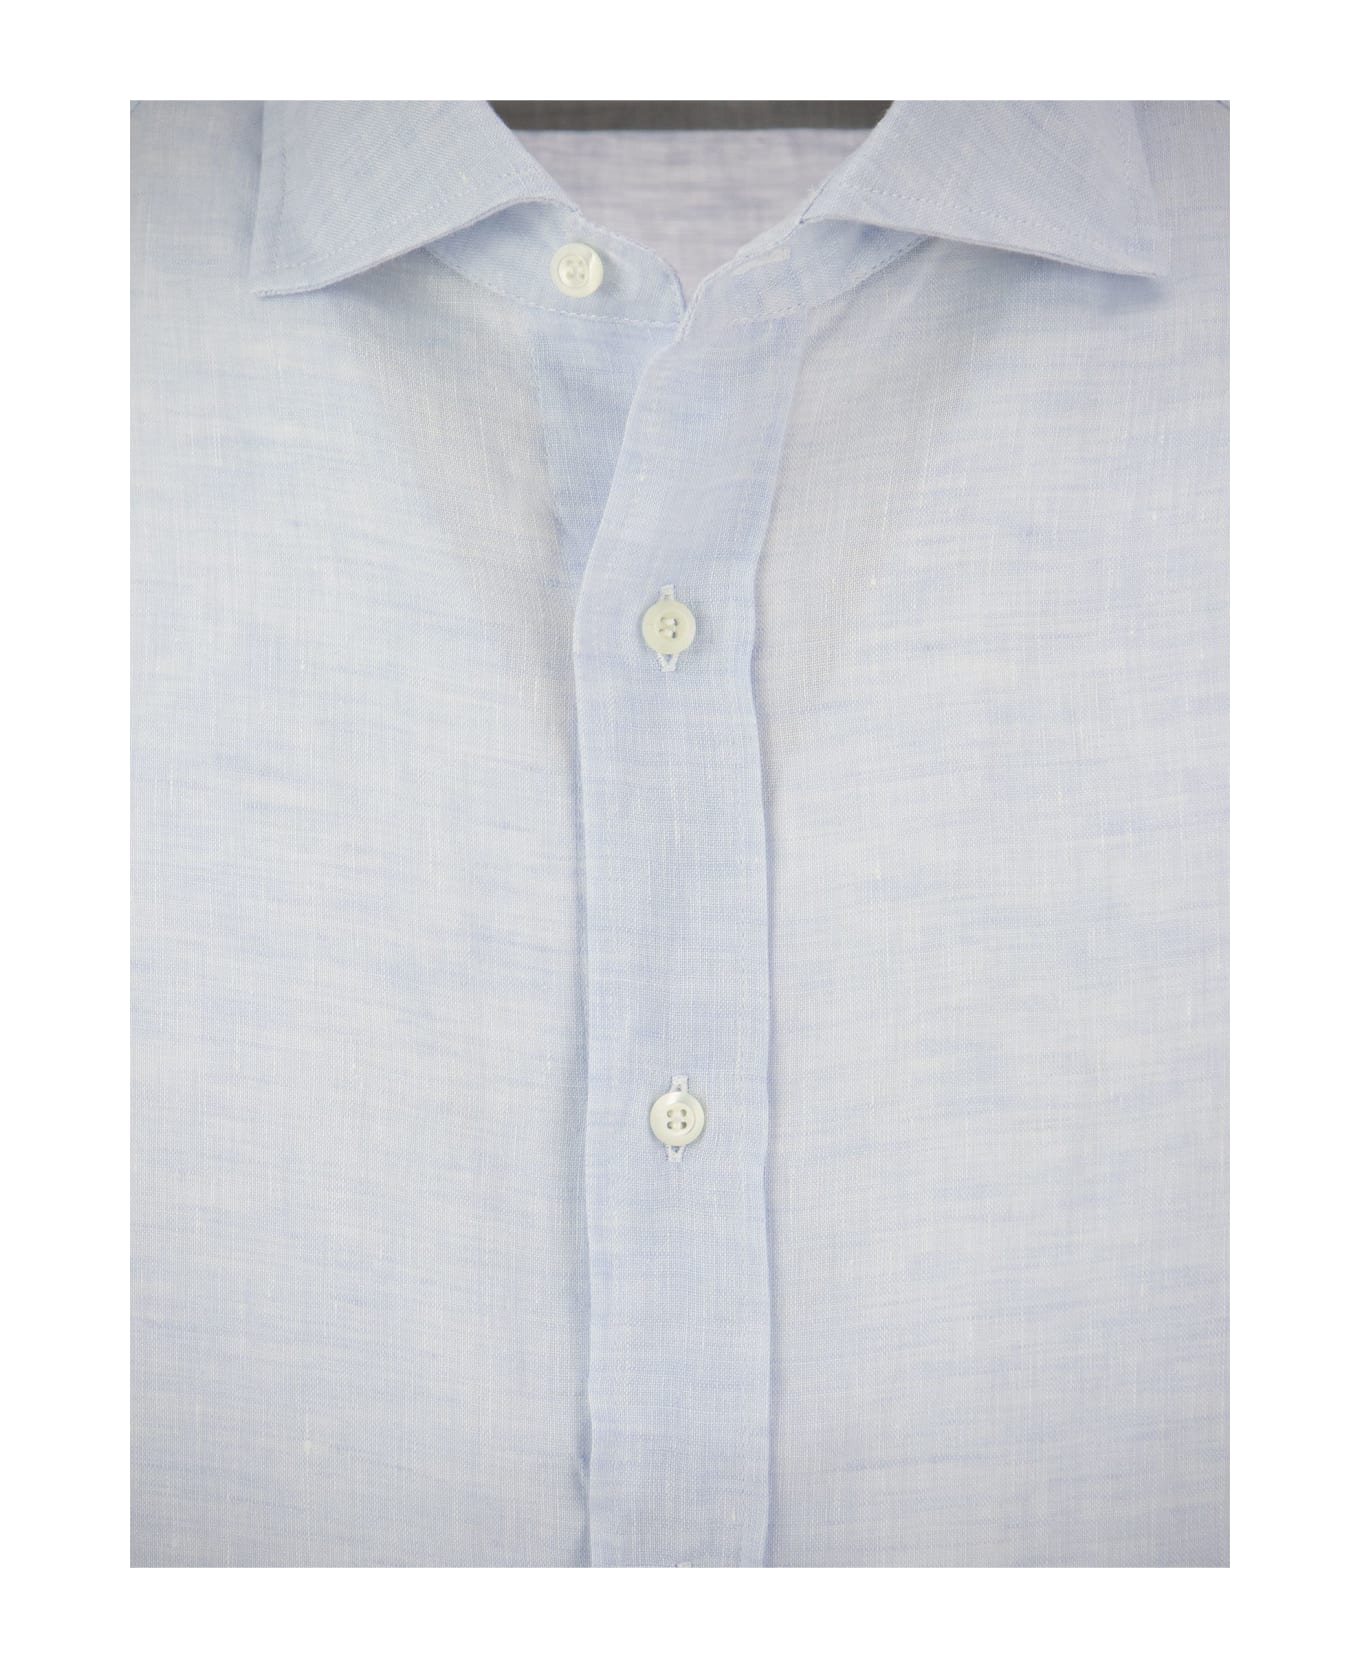 Brunello Cucinelli Slim Fit Linen Shirt With French Collar - Light Blue